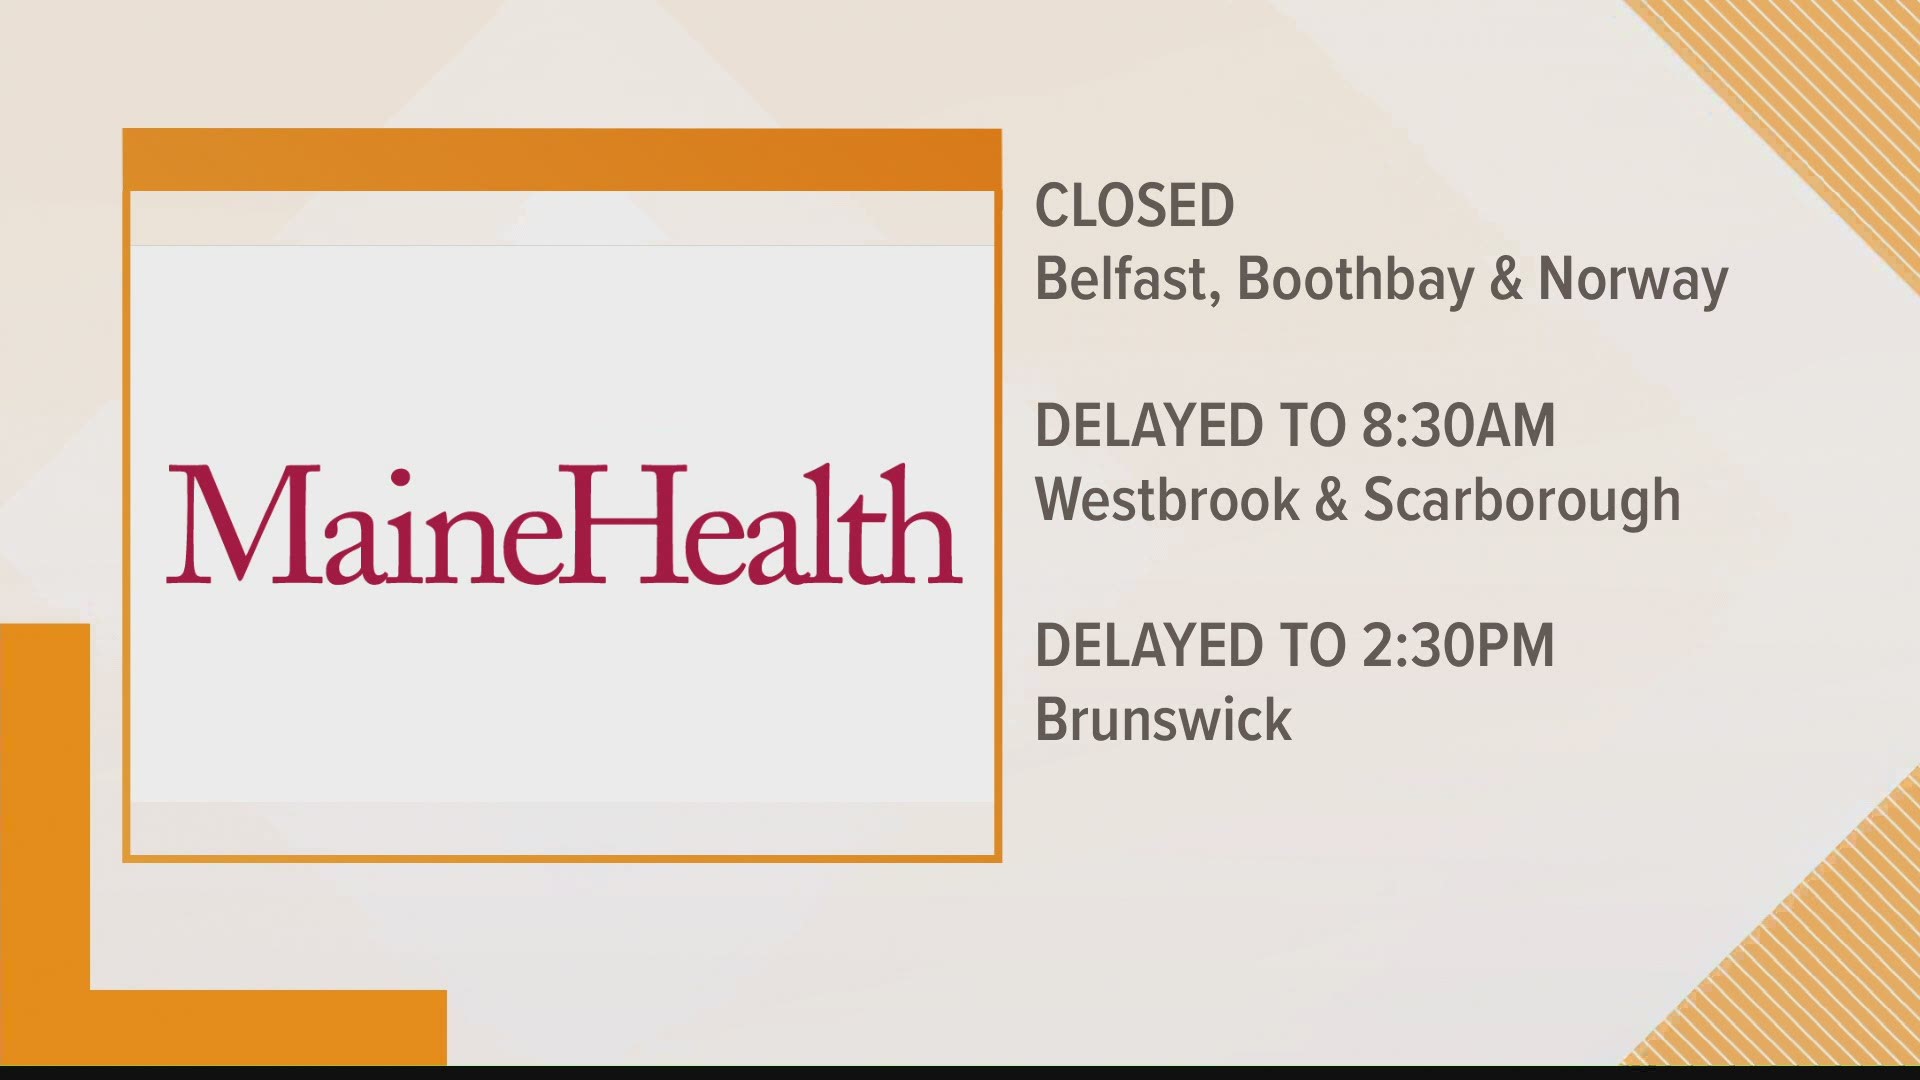 A number of clinics around the state have already cancelled for the day, or delaying the start time for appointments.